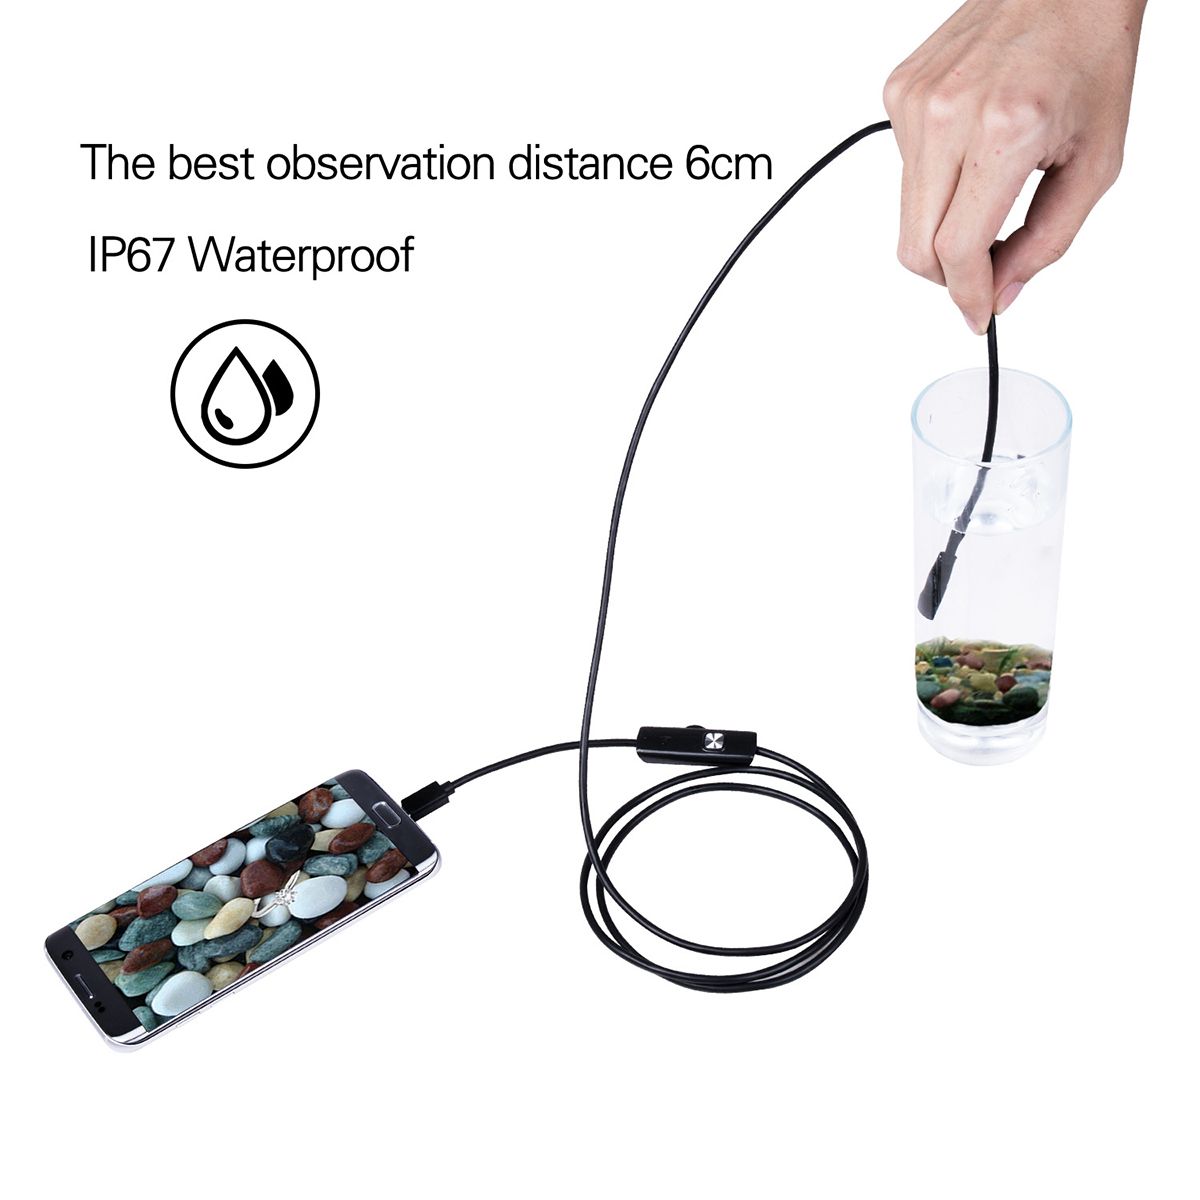 55mm-Lens-USB-Borescope-Snake-Inspection-Camera-Android-Mobile-Phone-10m5m2m1m-Soft-Wire-1612390